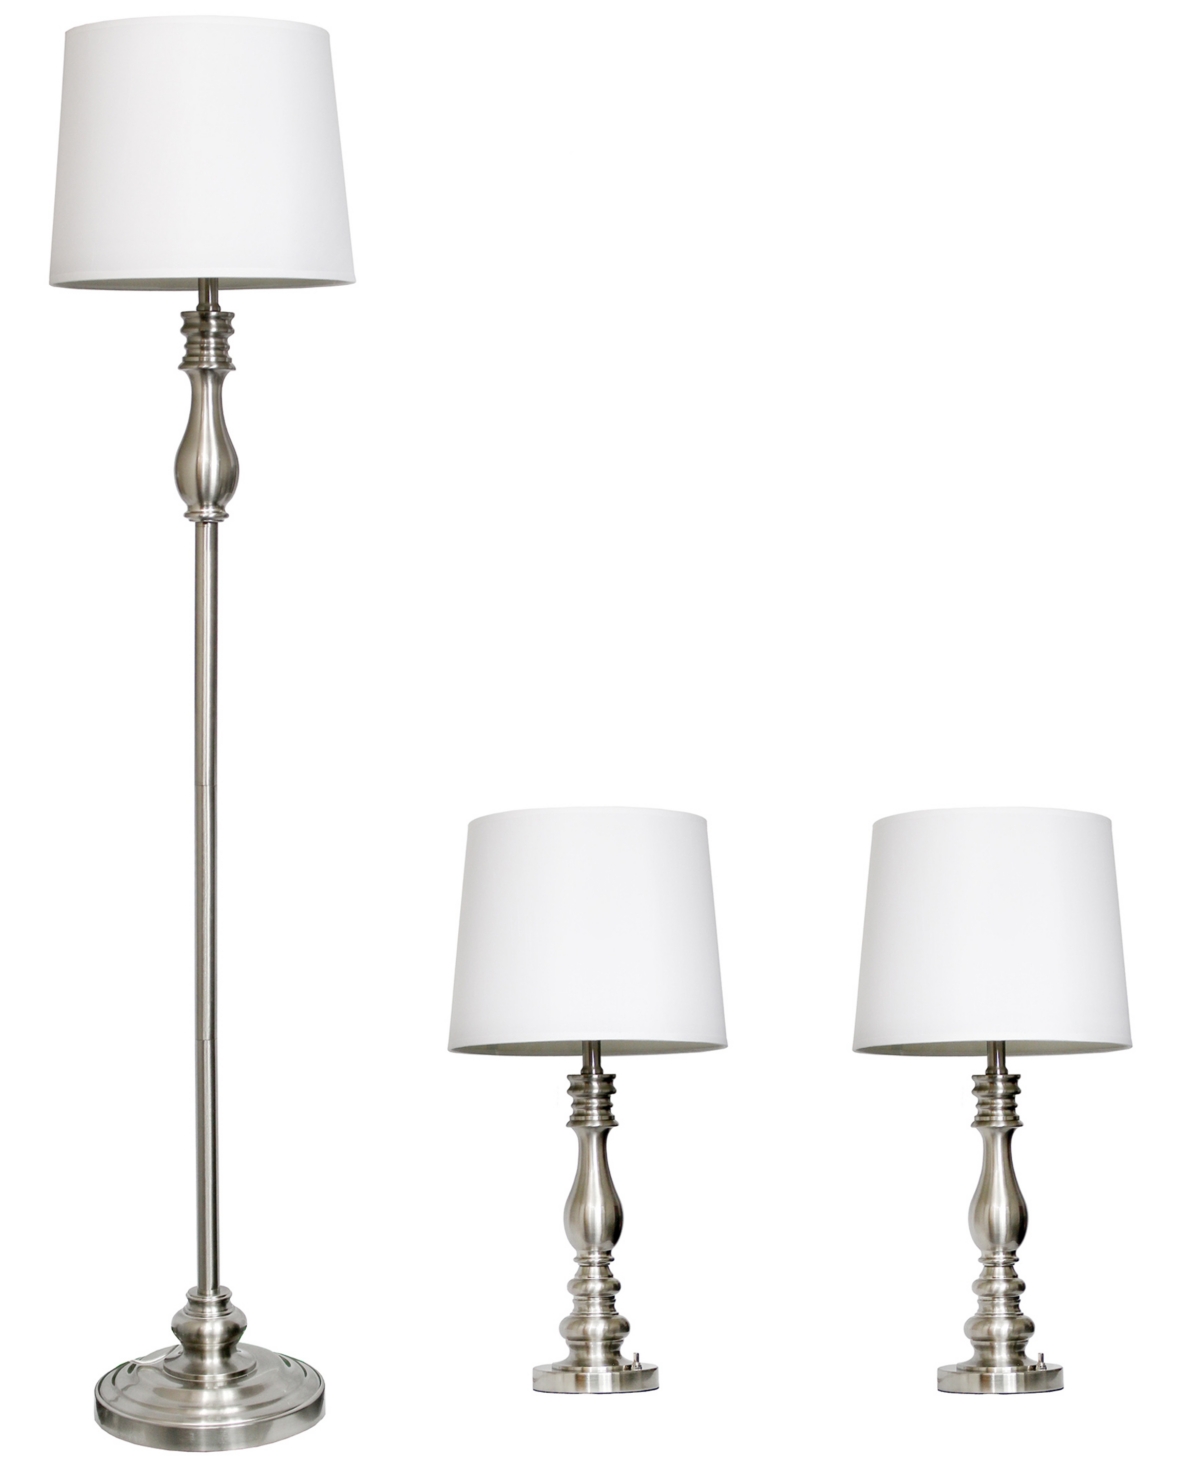 All The Rages Lalia Home Morocco Classic 3 Piece Metal Lamp Set In Brushed Steel